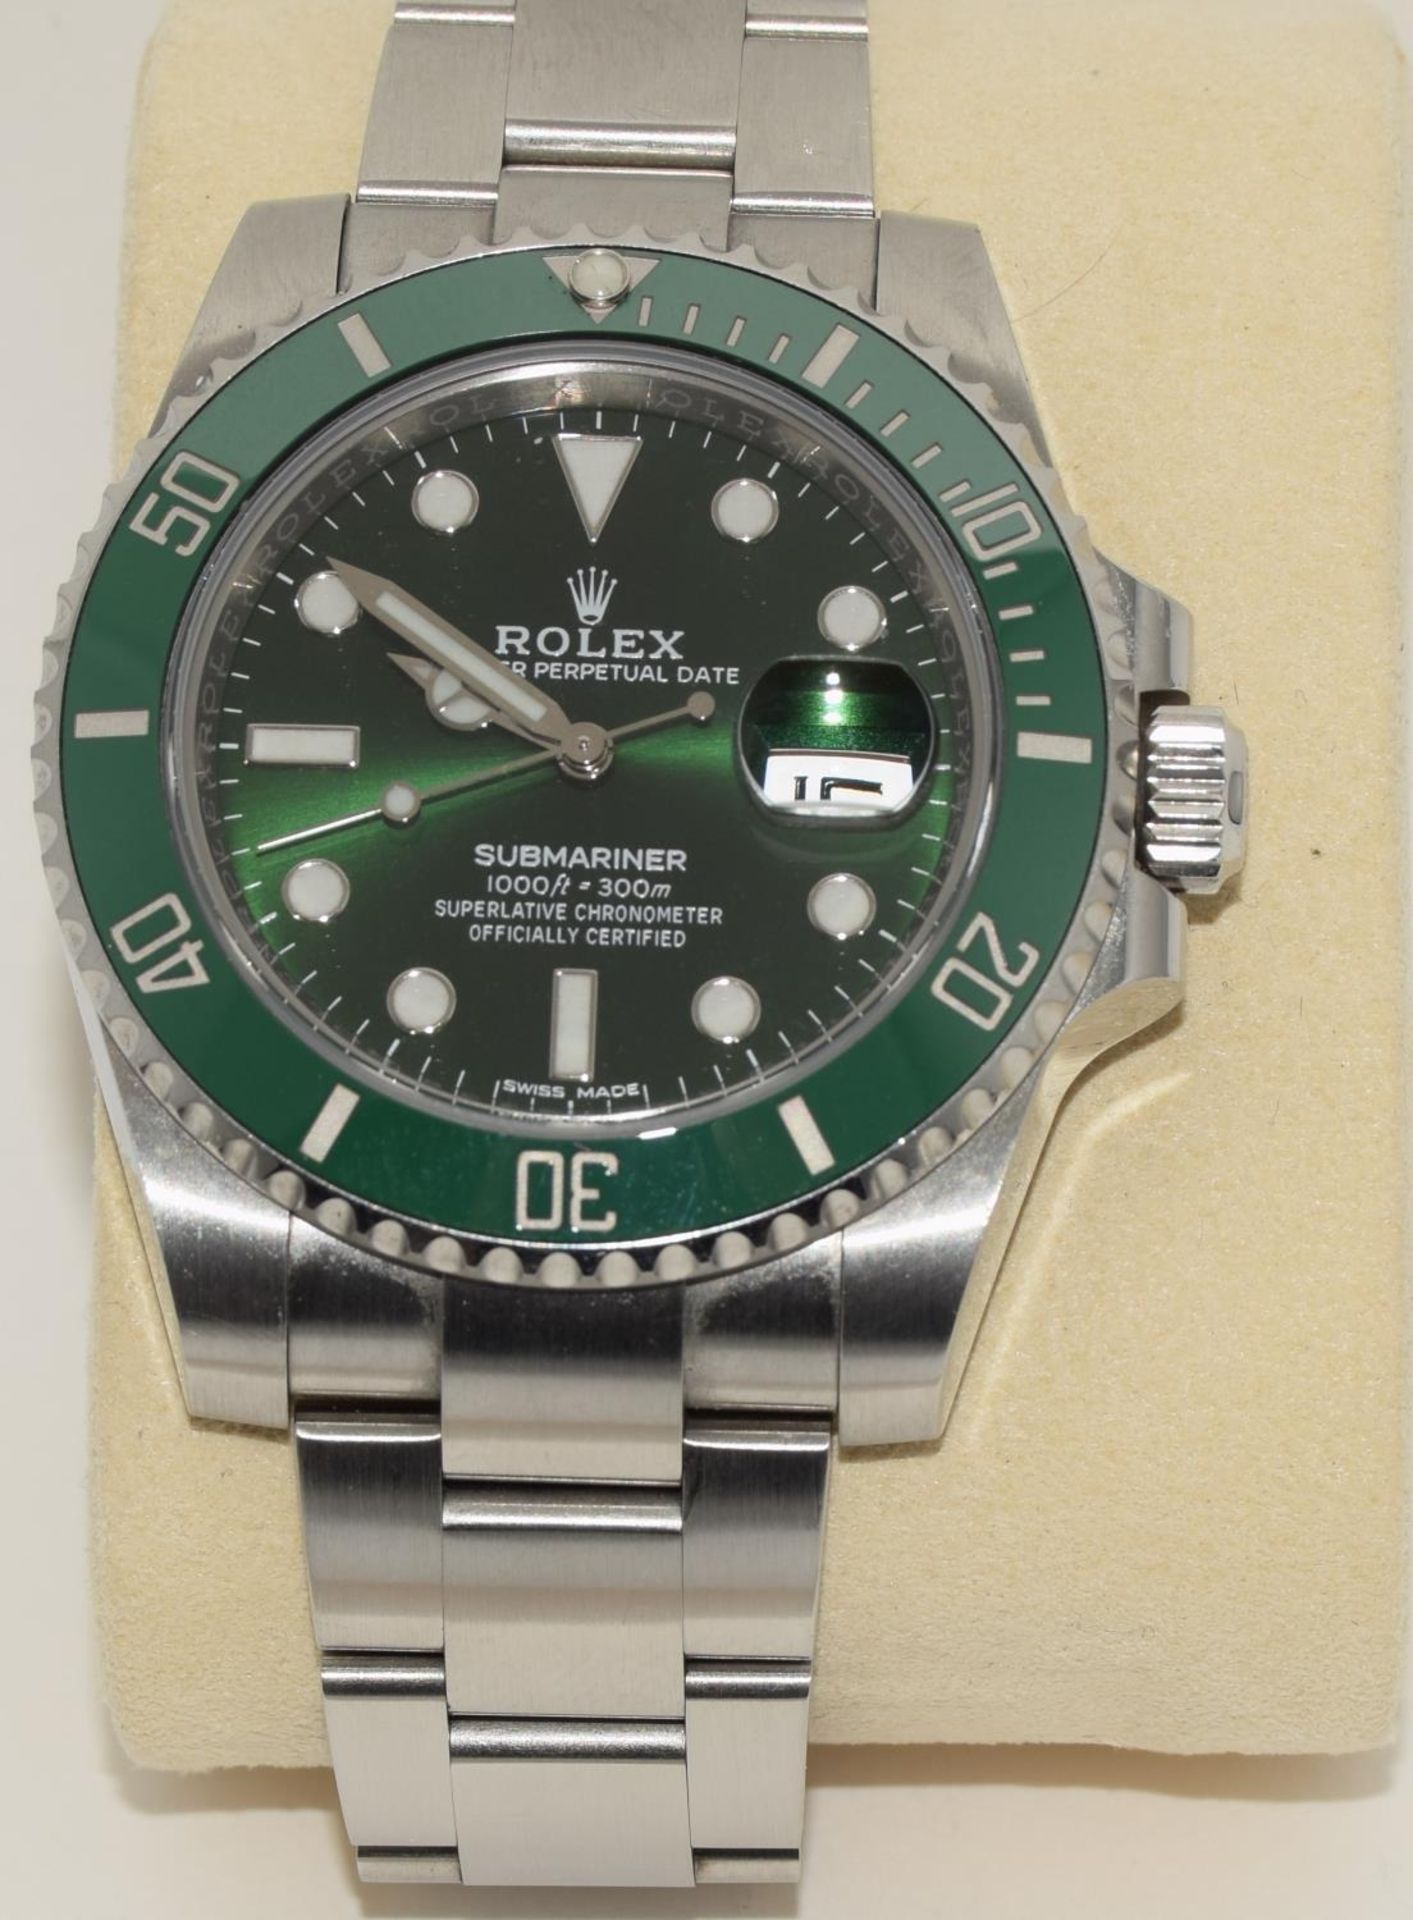 Rolex 2018 Submariner Hulk ref - 116610LV, Box and Papers. (ref 35) - Image 2 of 9